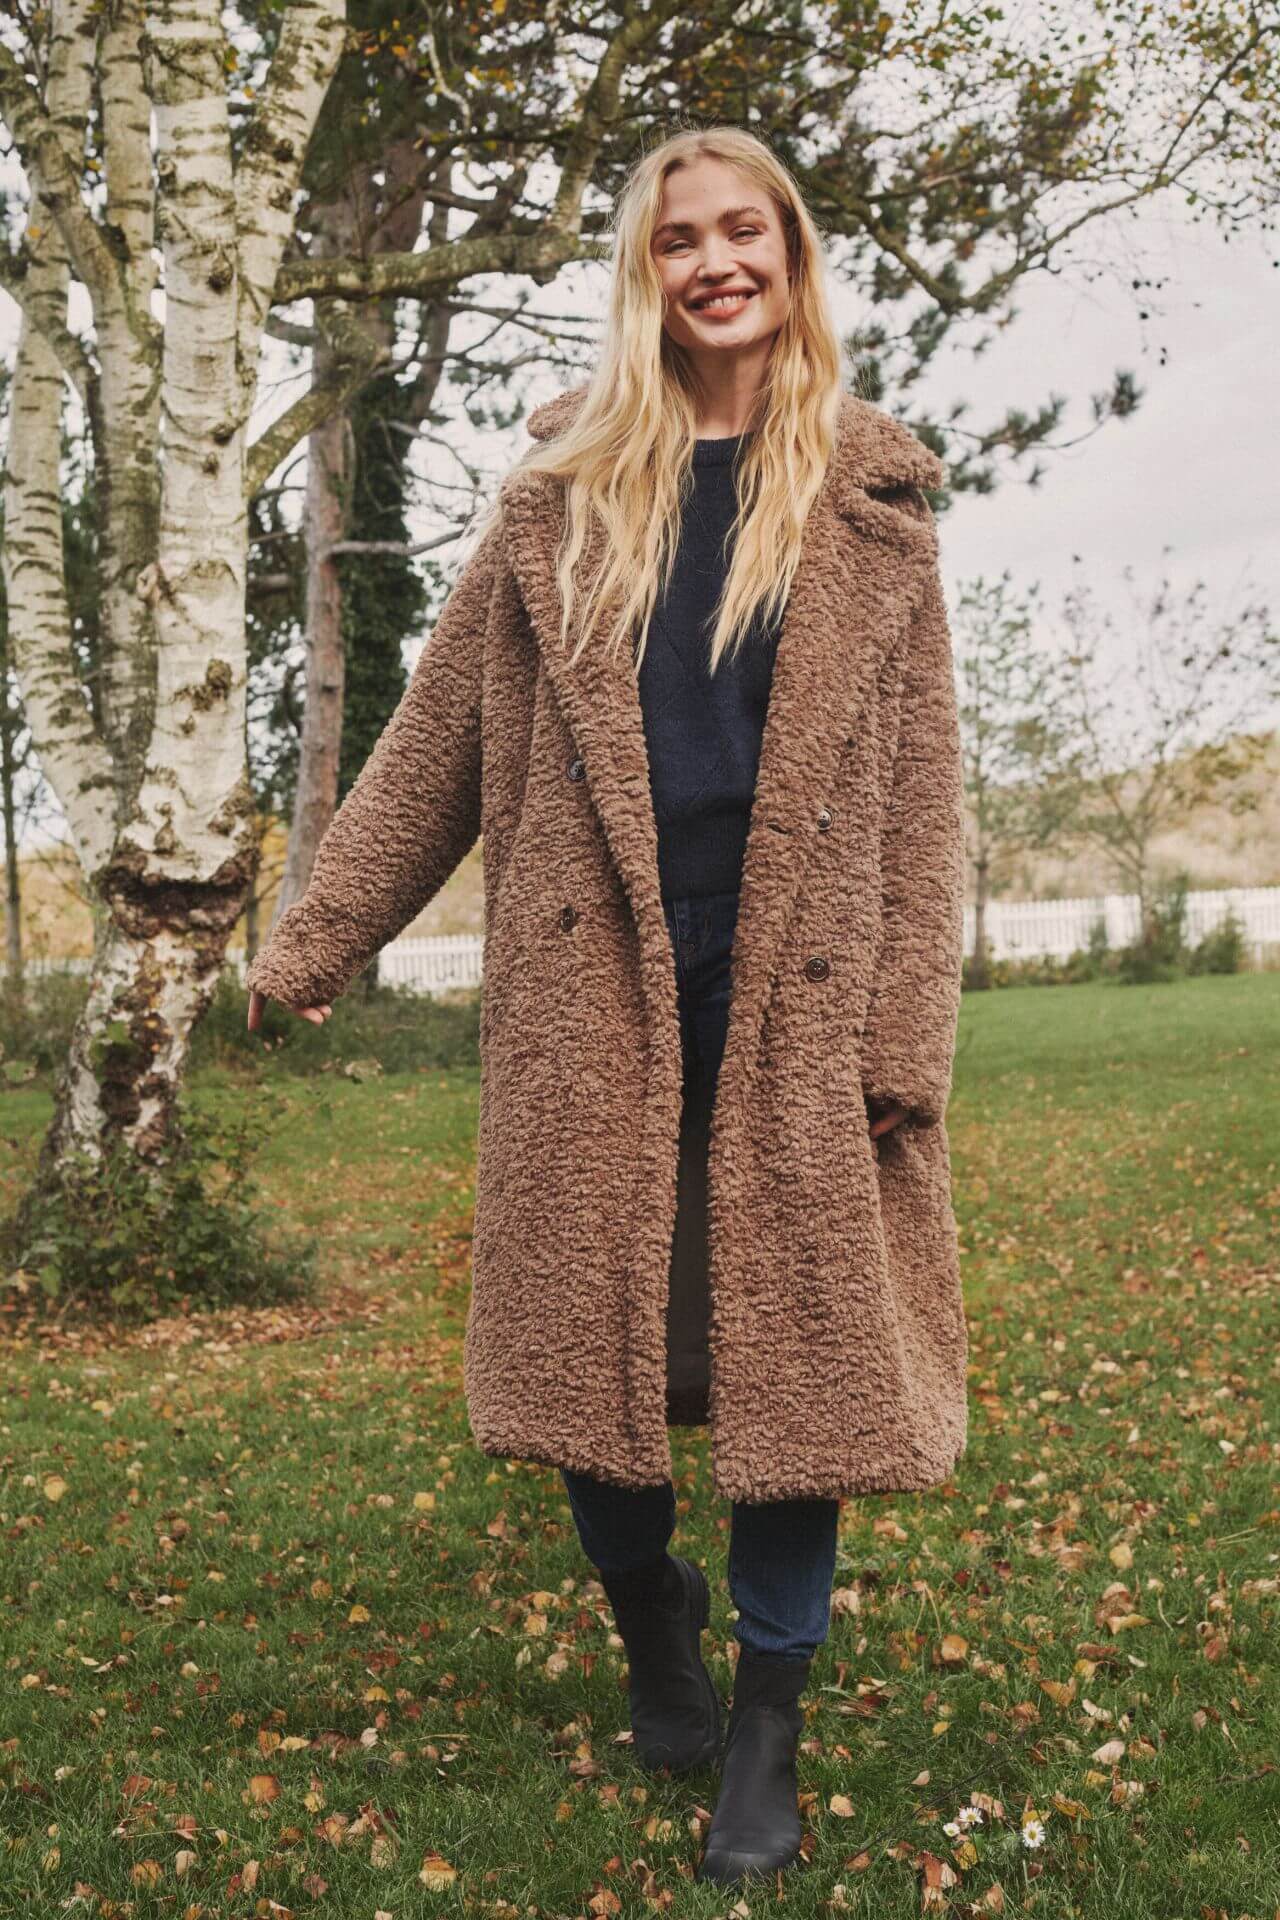 Camilla Forchhammer Christensen In Brown Long Overcoat Under Black Outfit